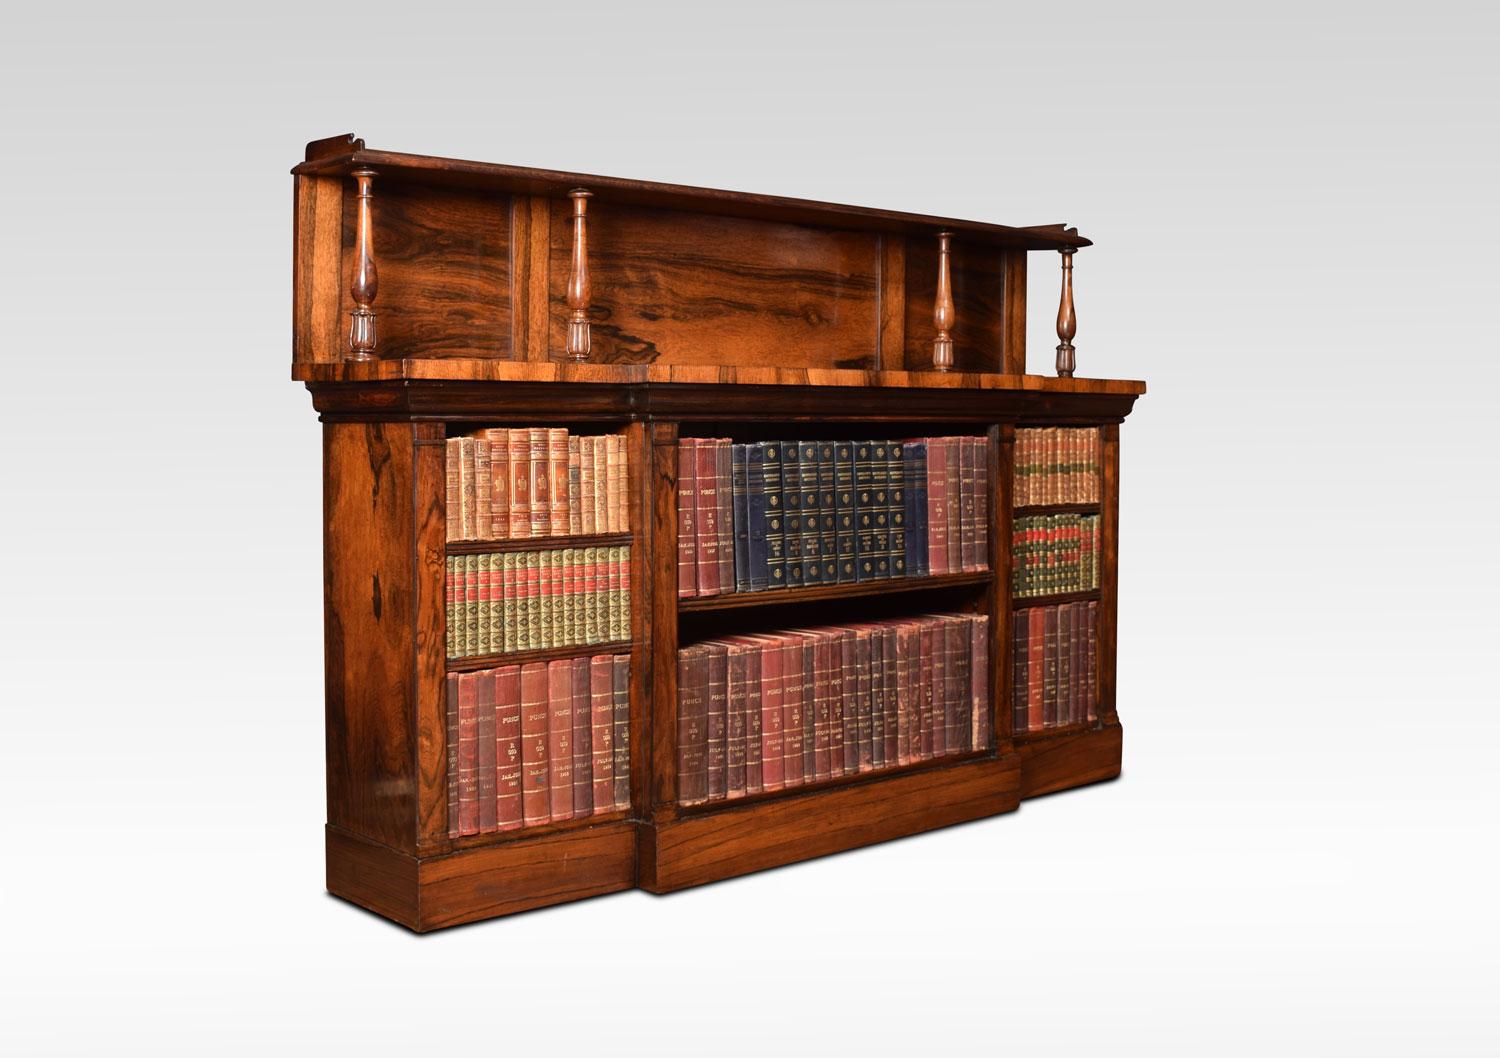 Regency bookcase the raised gallery supported on tulip carved fluted supports, to the large breakfront top with moulded edge. Above three bays of adjustable shelves each section having two shelves. All raised up on plinth base.
Dimensions:
Height